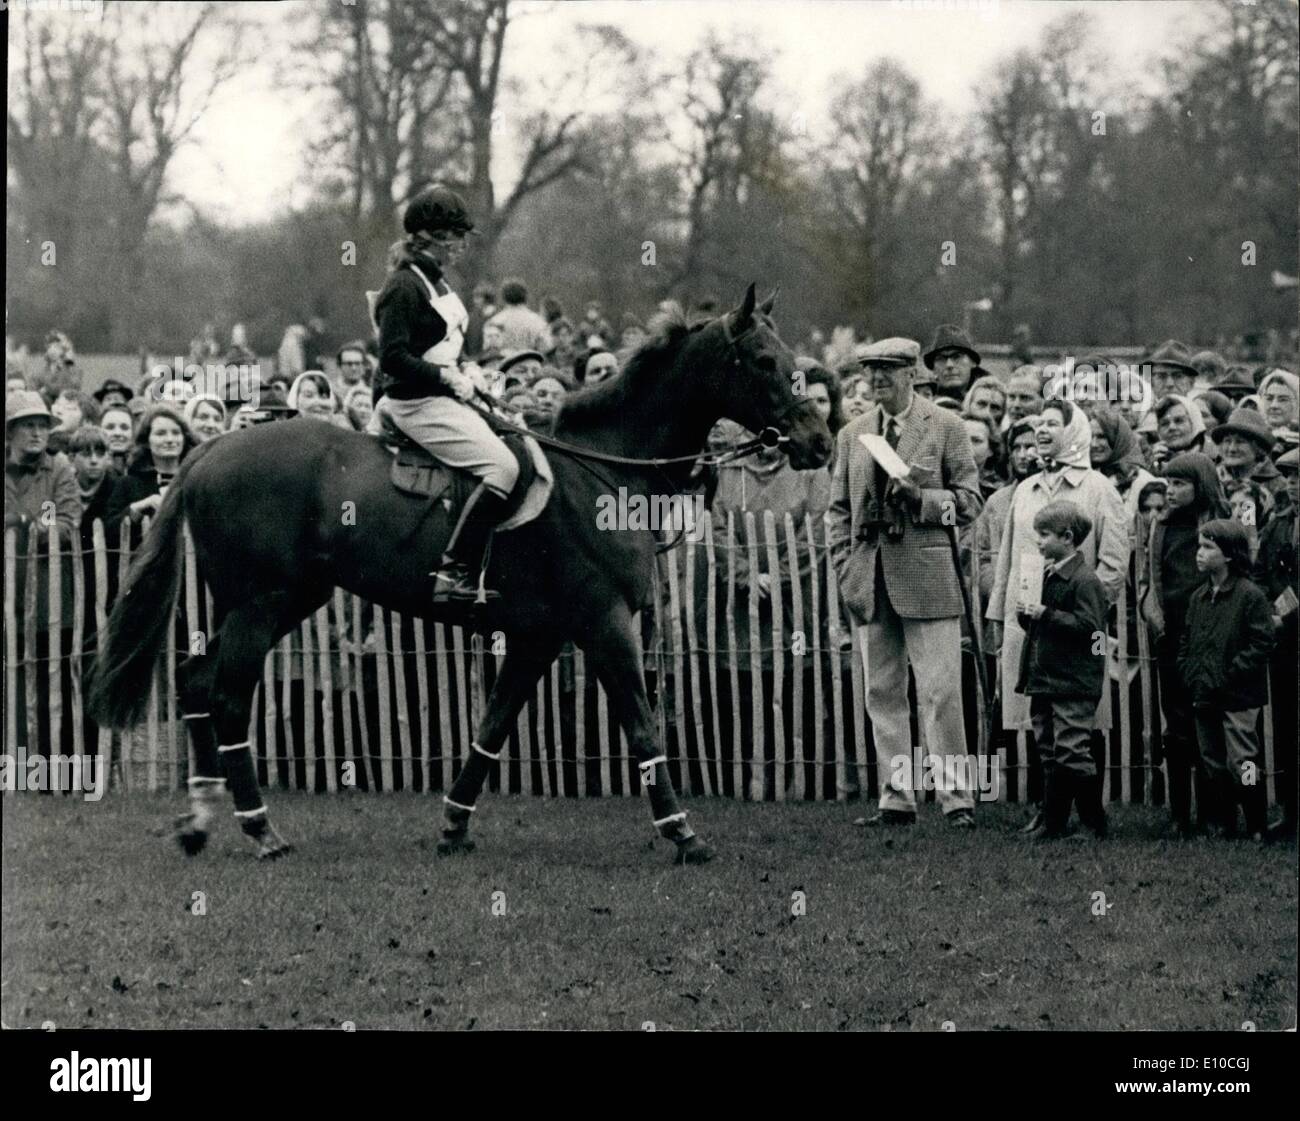 Apr. 04, 1972 - PRINCESS ANNE COMPETES IN THE CROSS-COUNTRY TEST AT THE BADMINTON HORSE TRAILS THREE-DAY EVENT. Princess Anne, riding her horse Doublet, came through her big cross-country test at the Badminton Horse Trials Three-day event this afternoon with flying colours. Watched by other members of the Royal Family she successfully completed the demanding course in good time Stock Photo